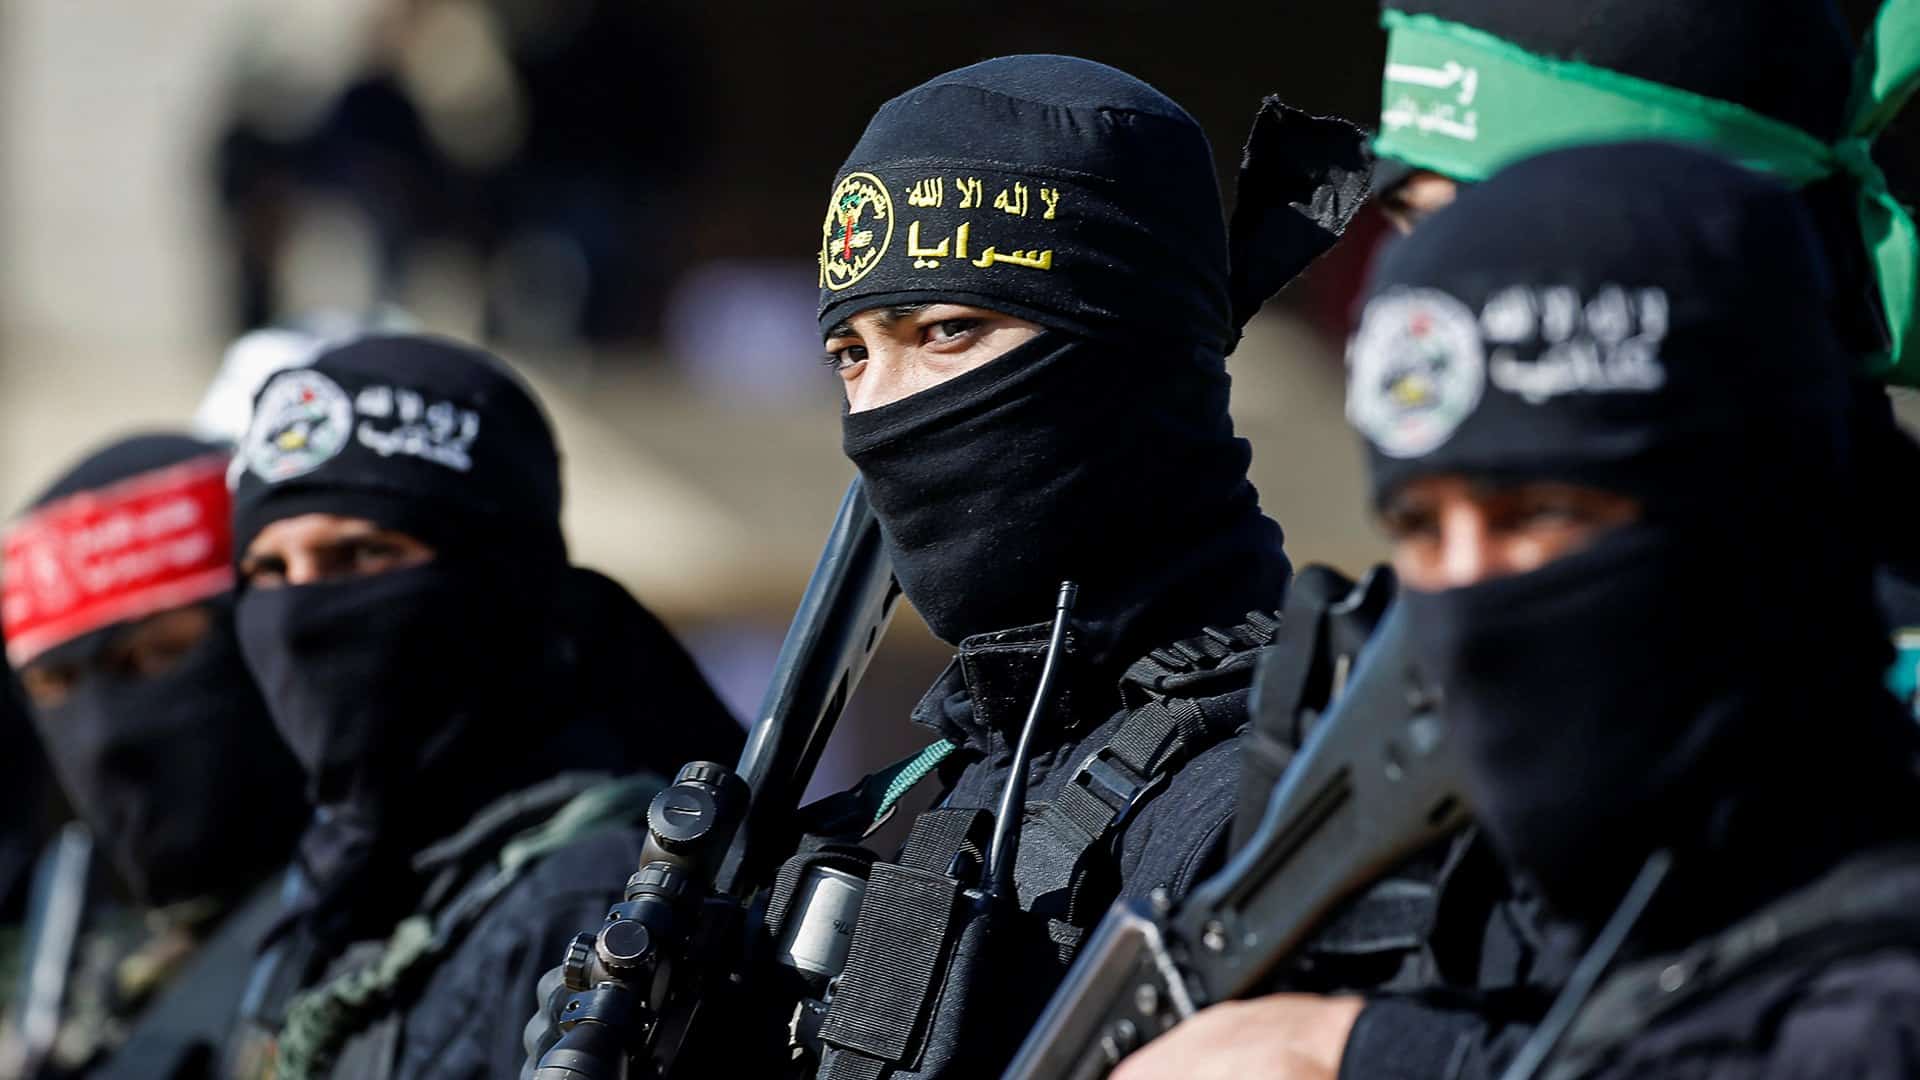 Palestinian resistance fighters. Photo: Reuters/File photo.